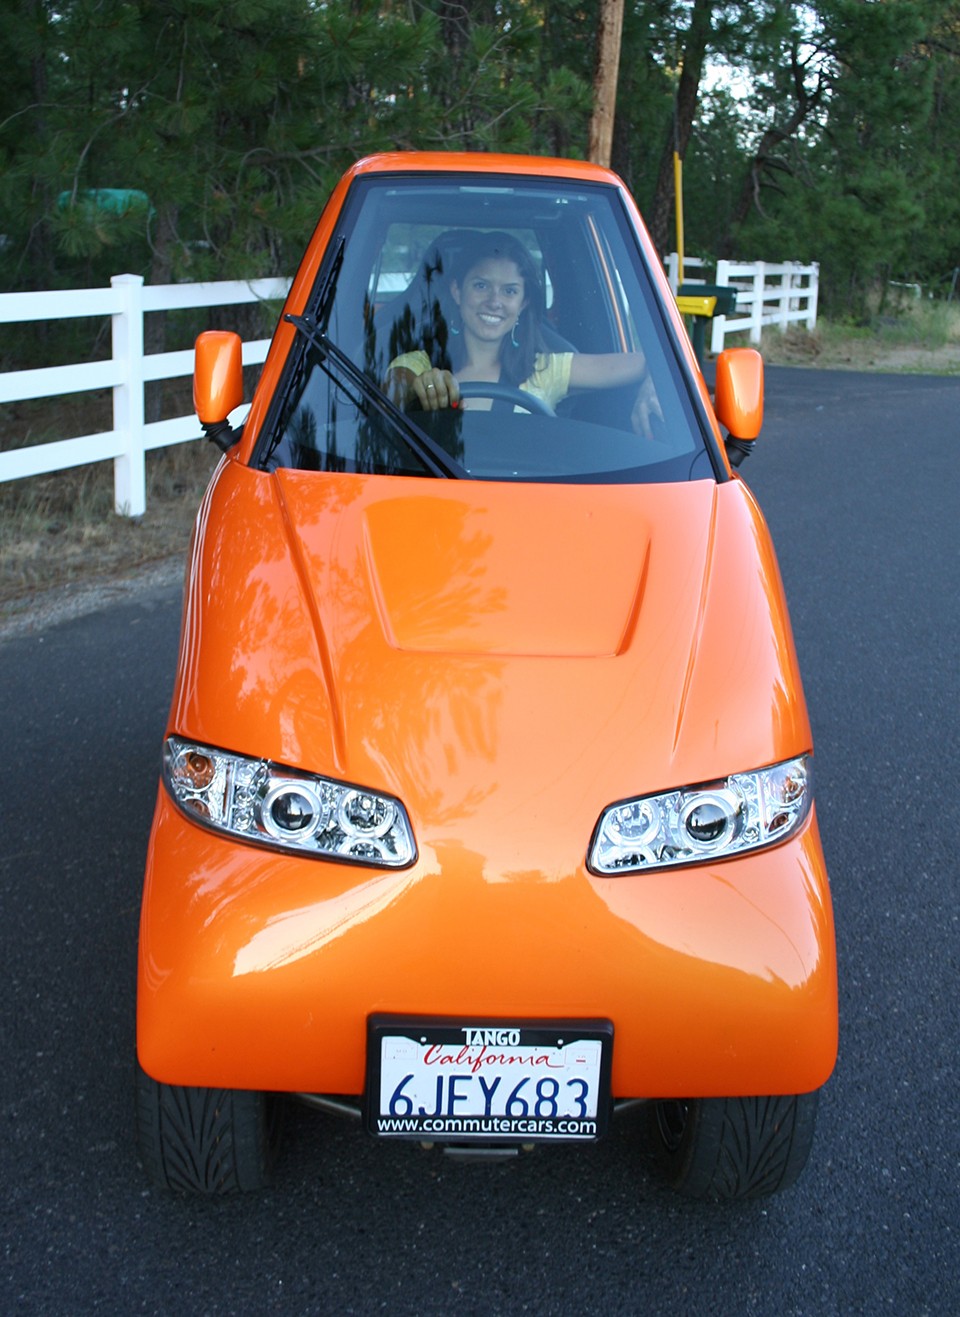 The Tango T600, the Electric MicroCar With Big Dreams and a 420,000